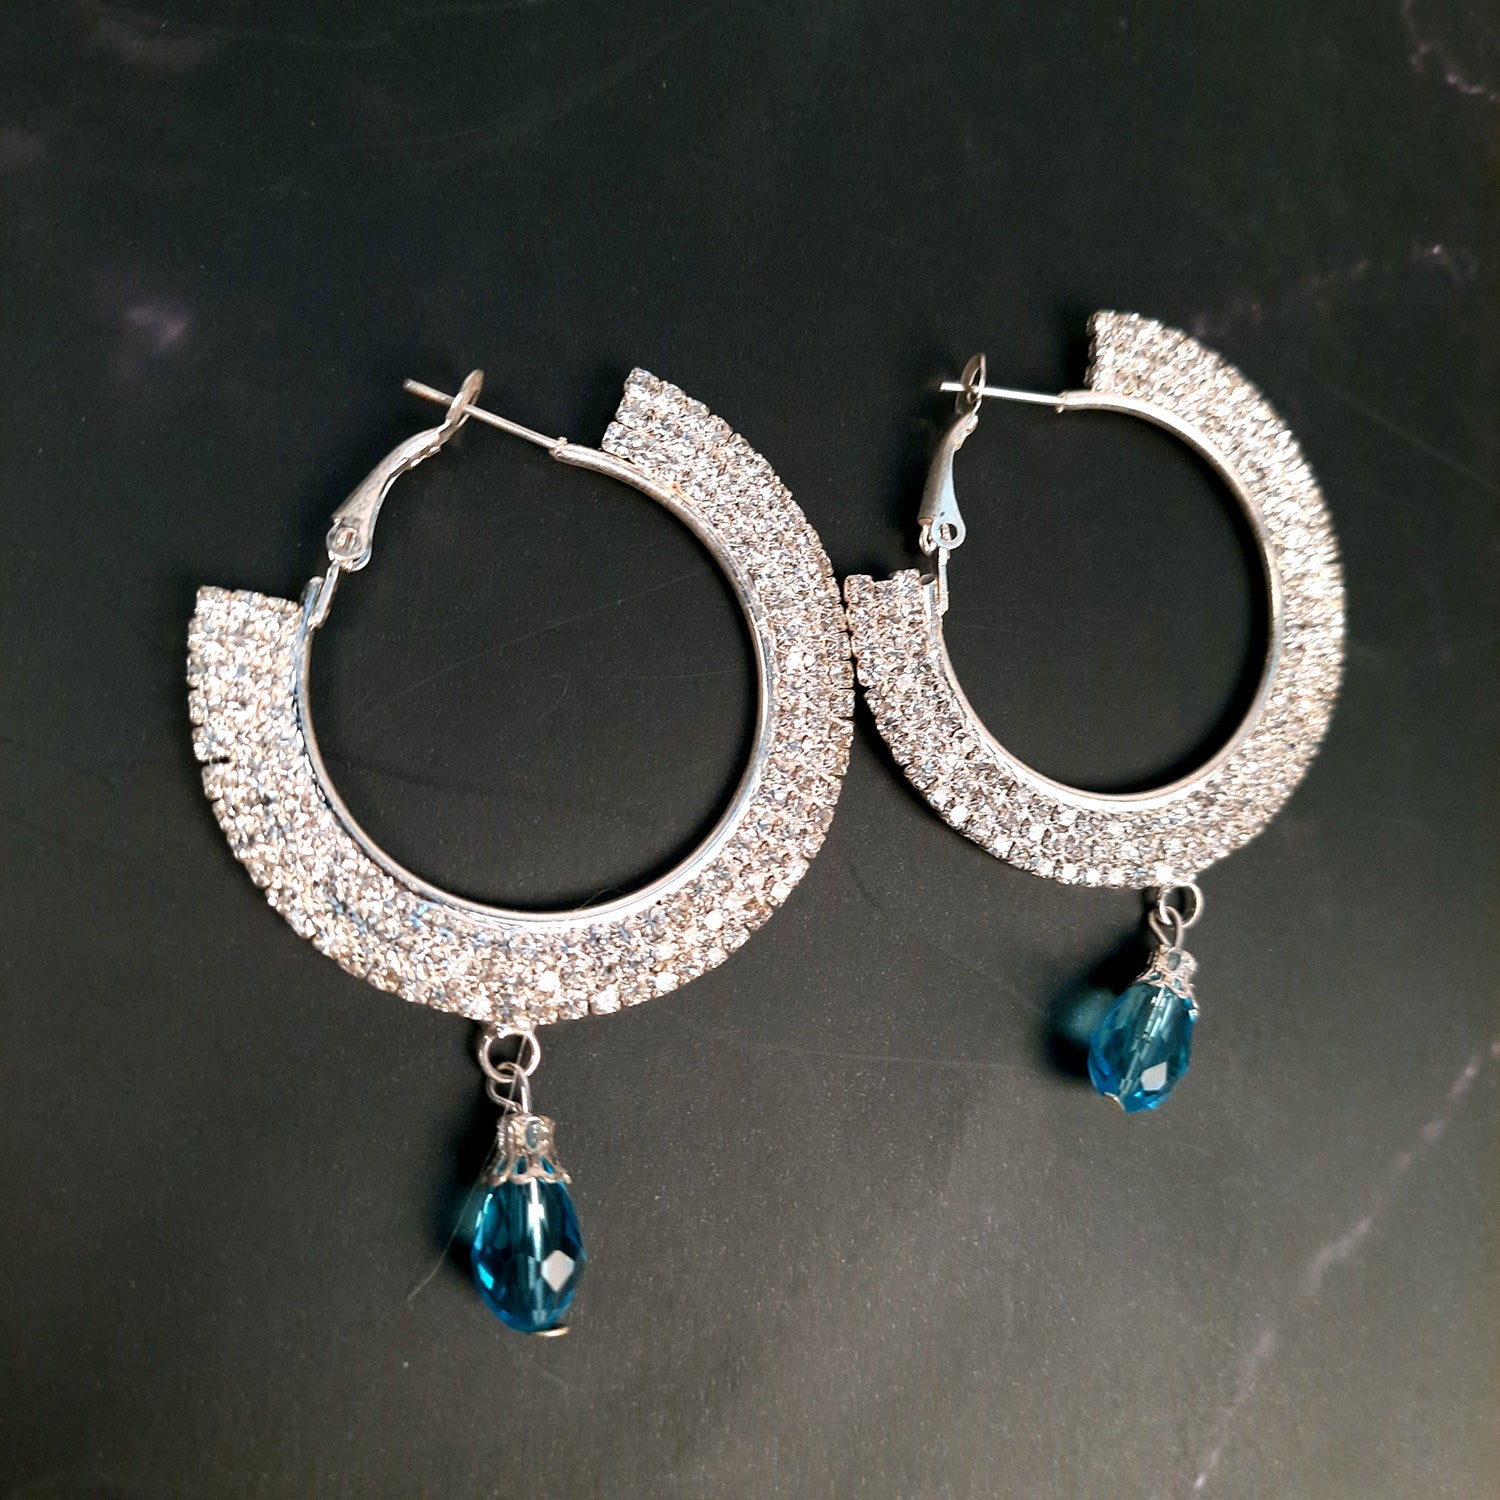 Earrings Hoops / Danglers - for Girls and Women | Latest Stylish Fashion Jewellery | Gifts for Her, Friendship Day, Valentine's Day Gift - apkamart